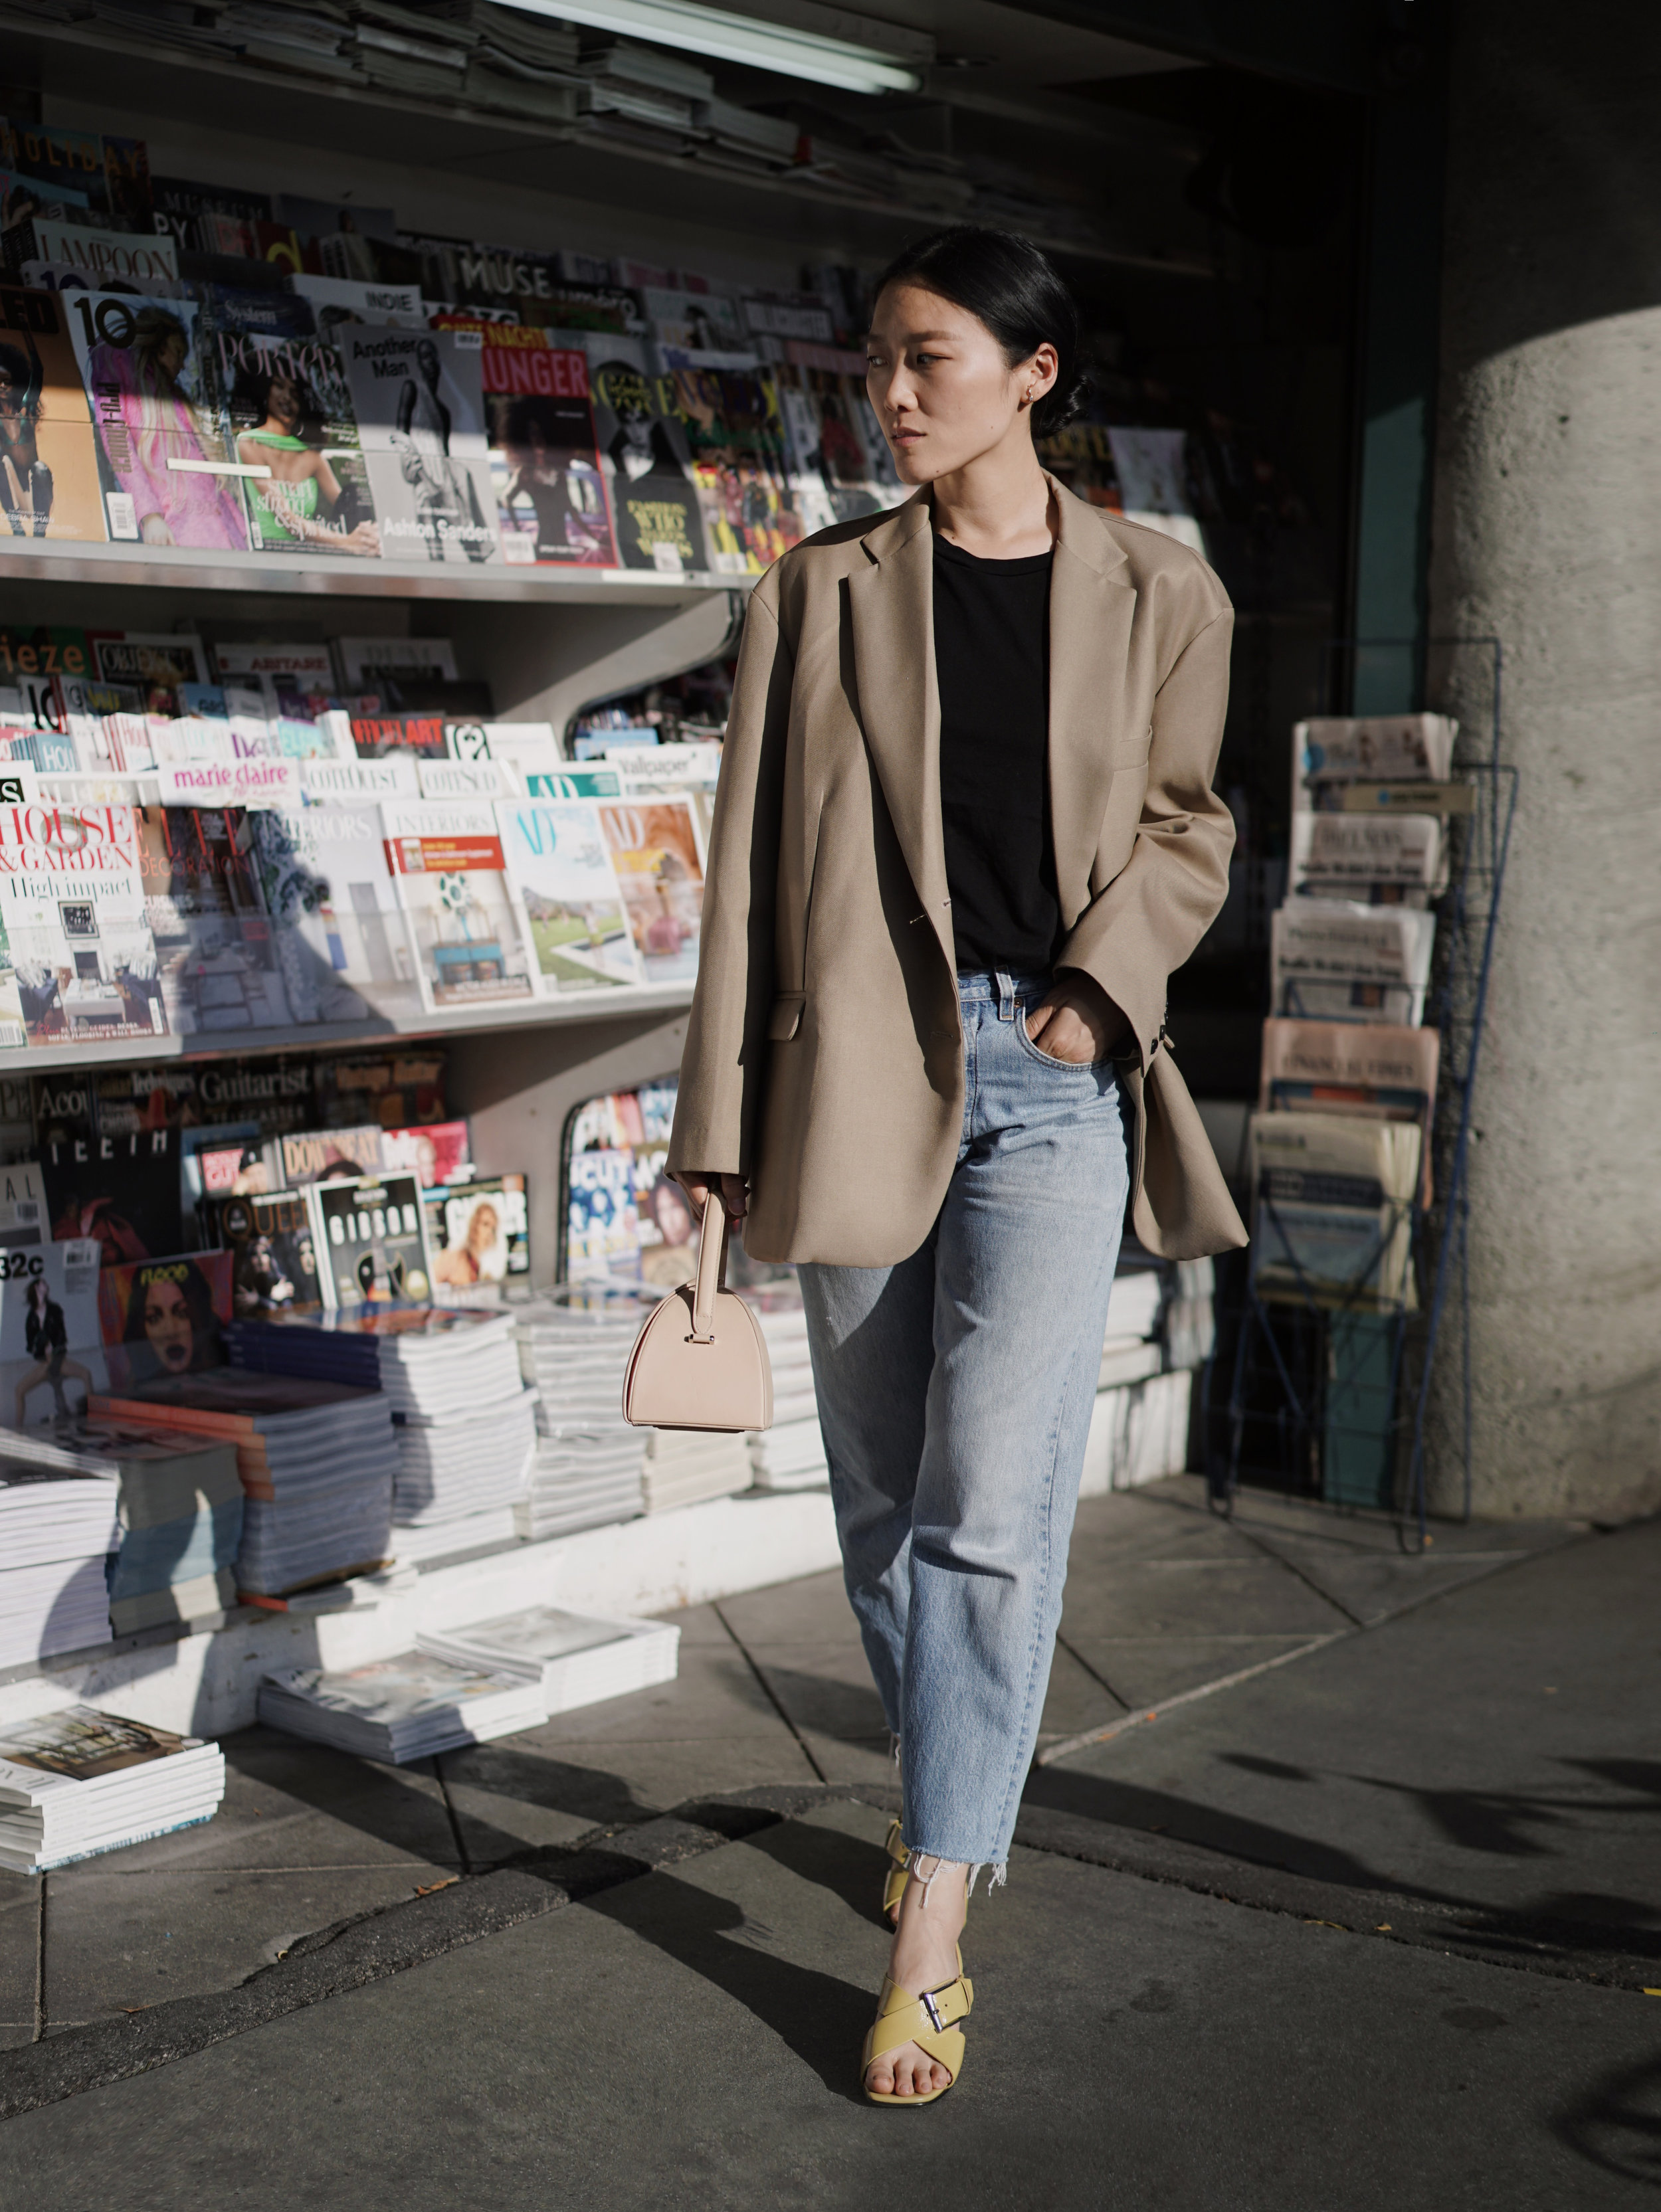 Wear an oversized blazer over anything, and you'll instantly look